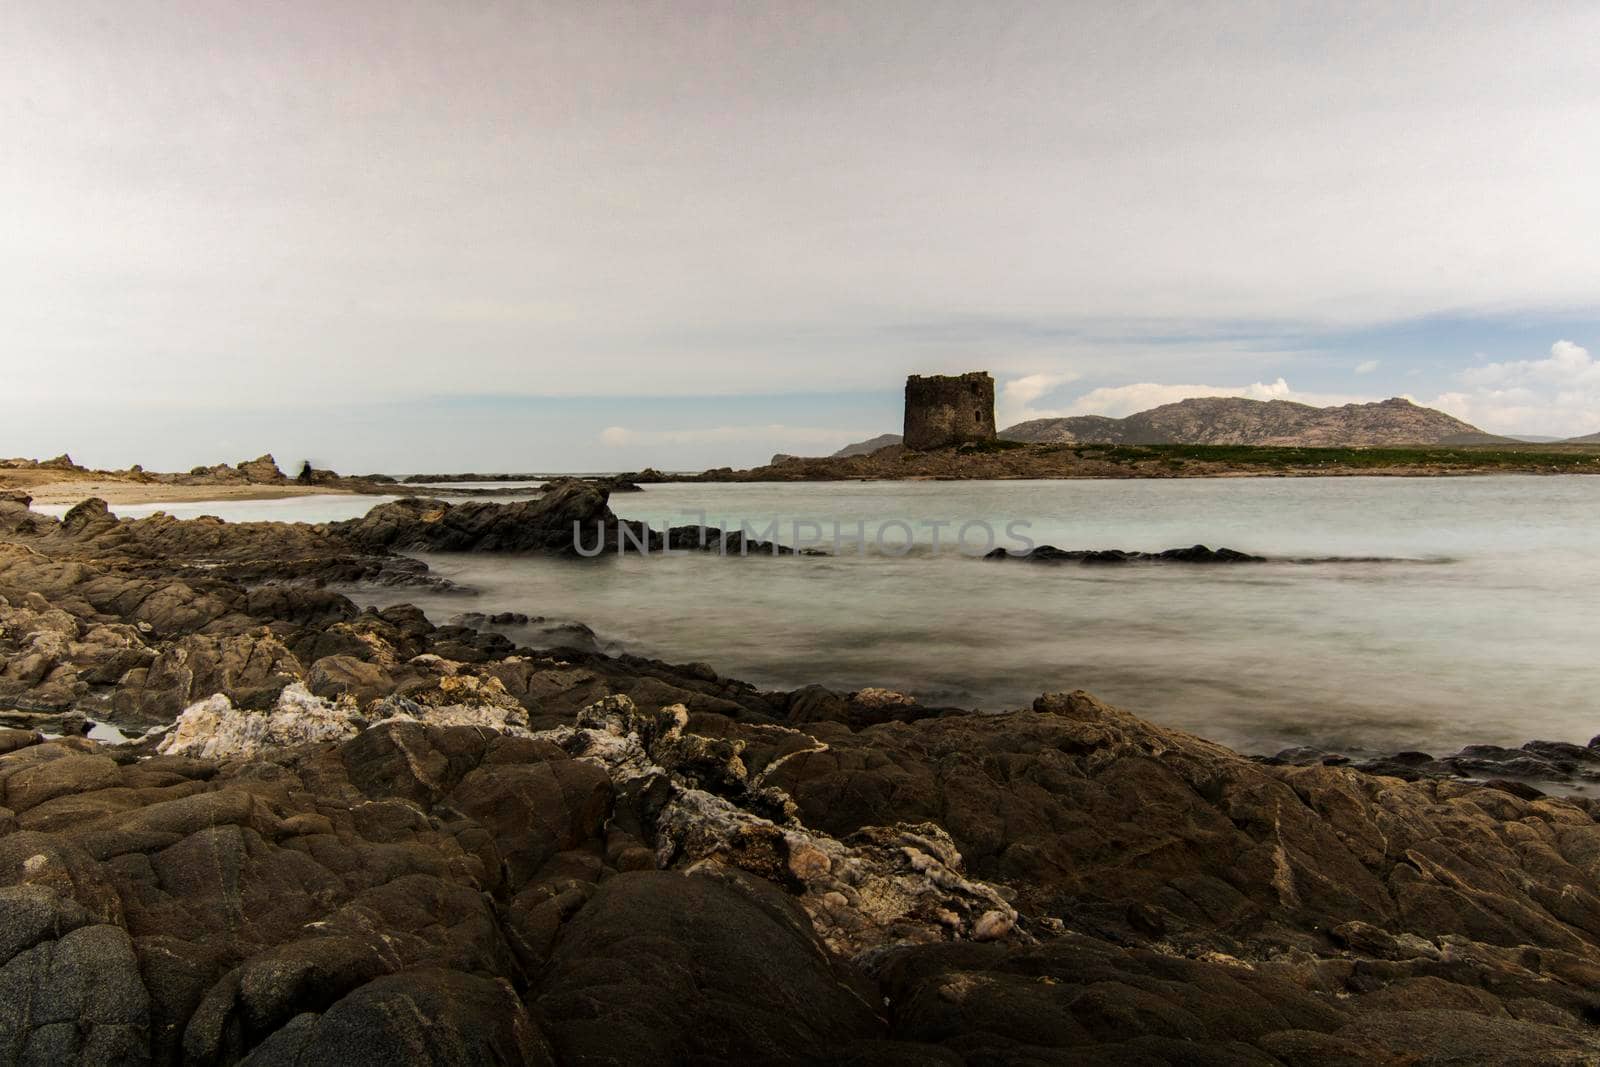 La Pelosa beautiful and tourist rocky beach and tower in Sardegna island in Italy in a long exposure picture